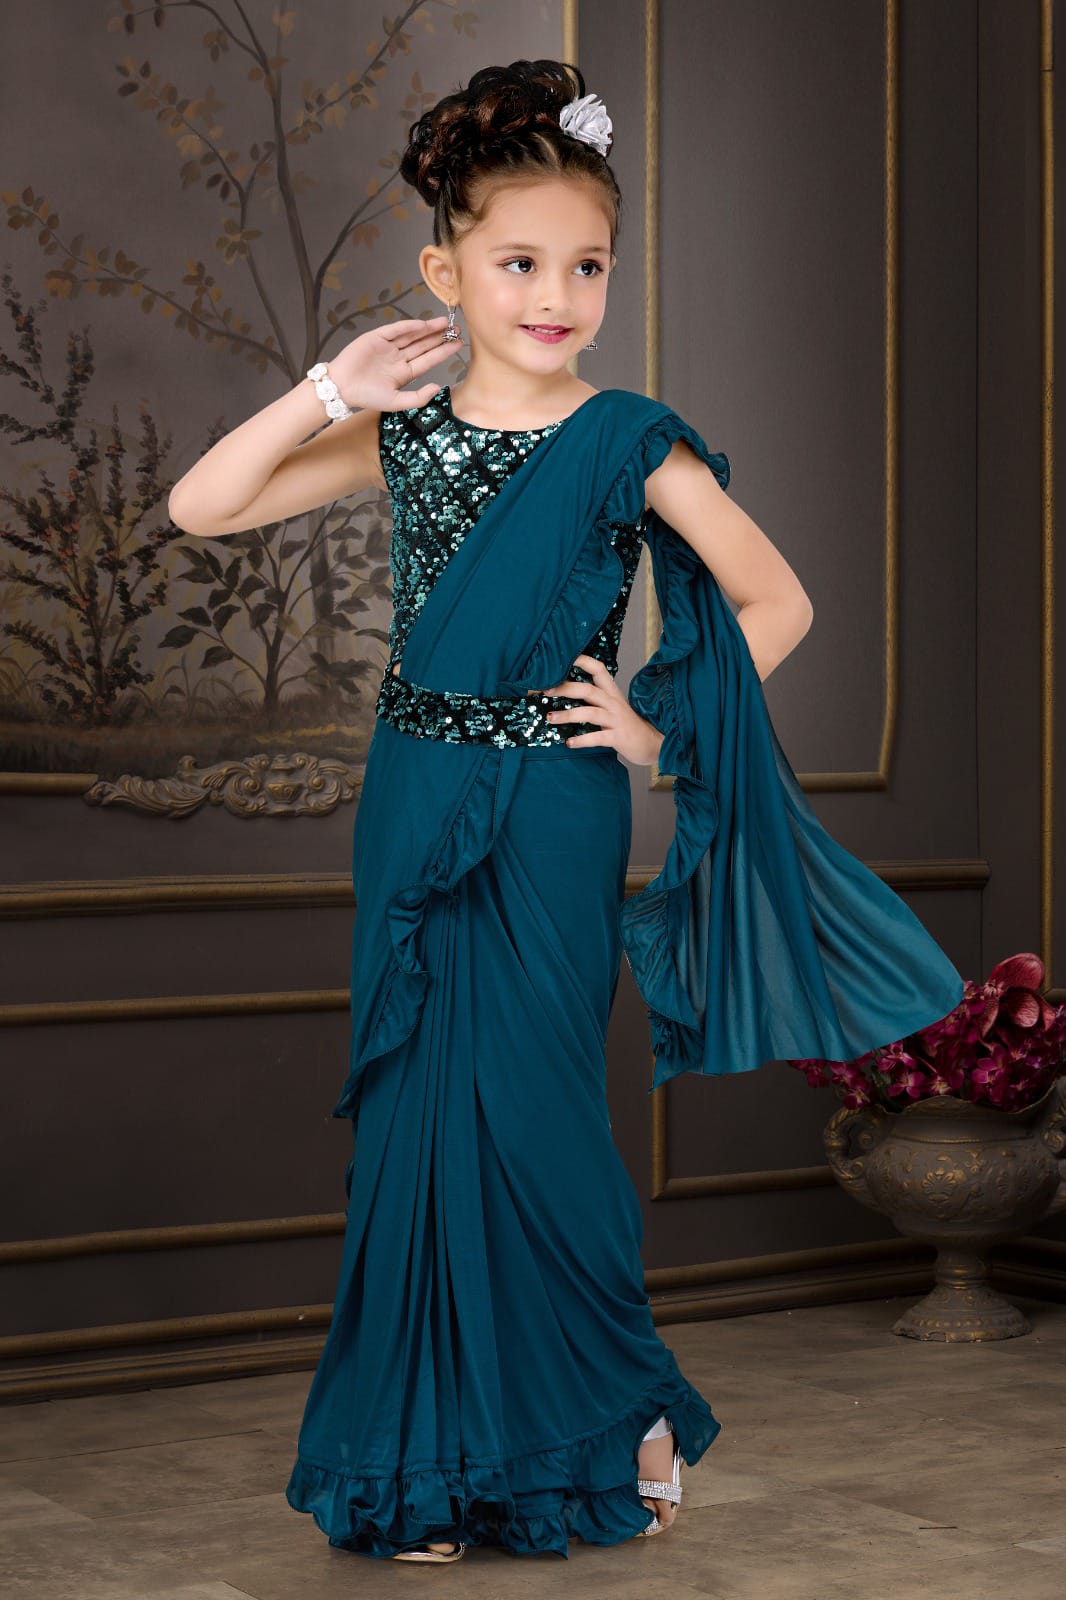 Readymade Saree  in Peacock Blue/Teal Shade for Girls, Indian Ethnic Outfit, GRL #1258